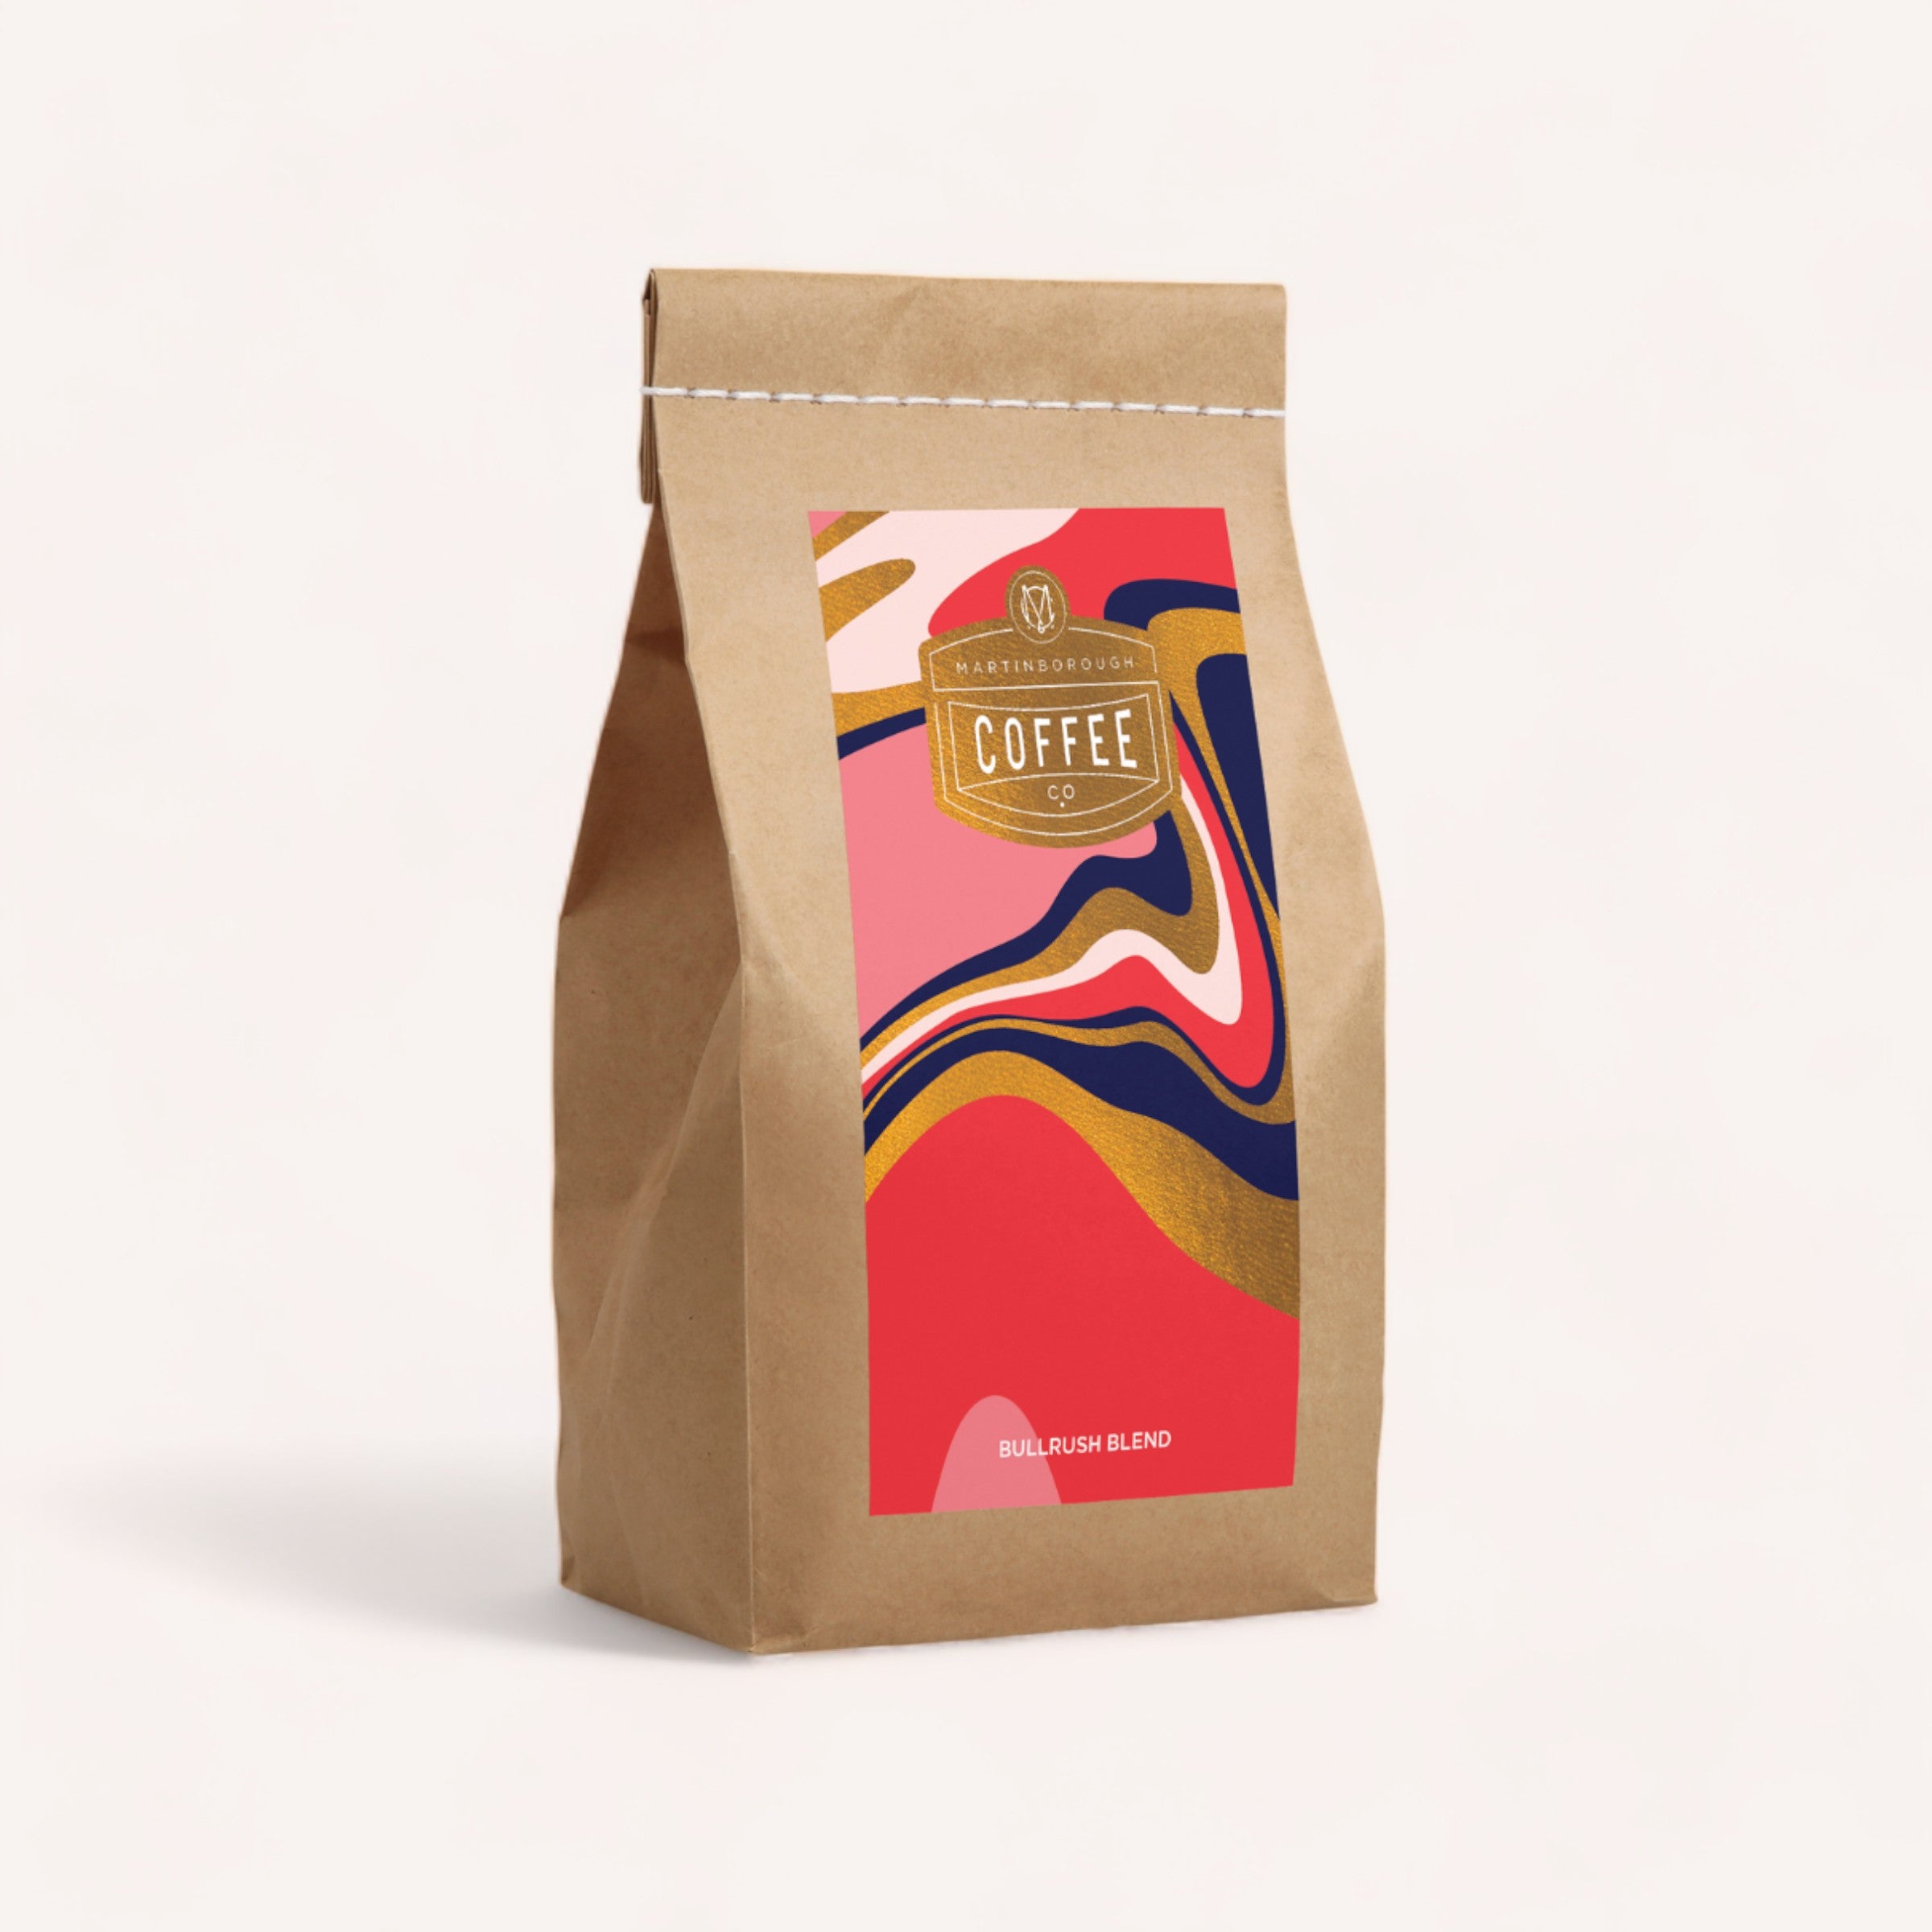 A stylishly branded package of giftbox co. Coffee, Anyone? with vibrant abstract design on a plain background.